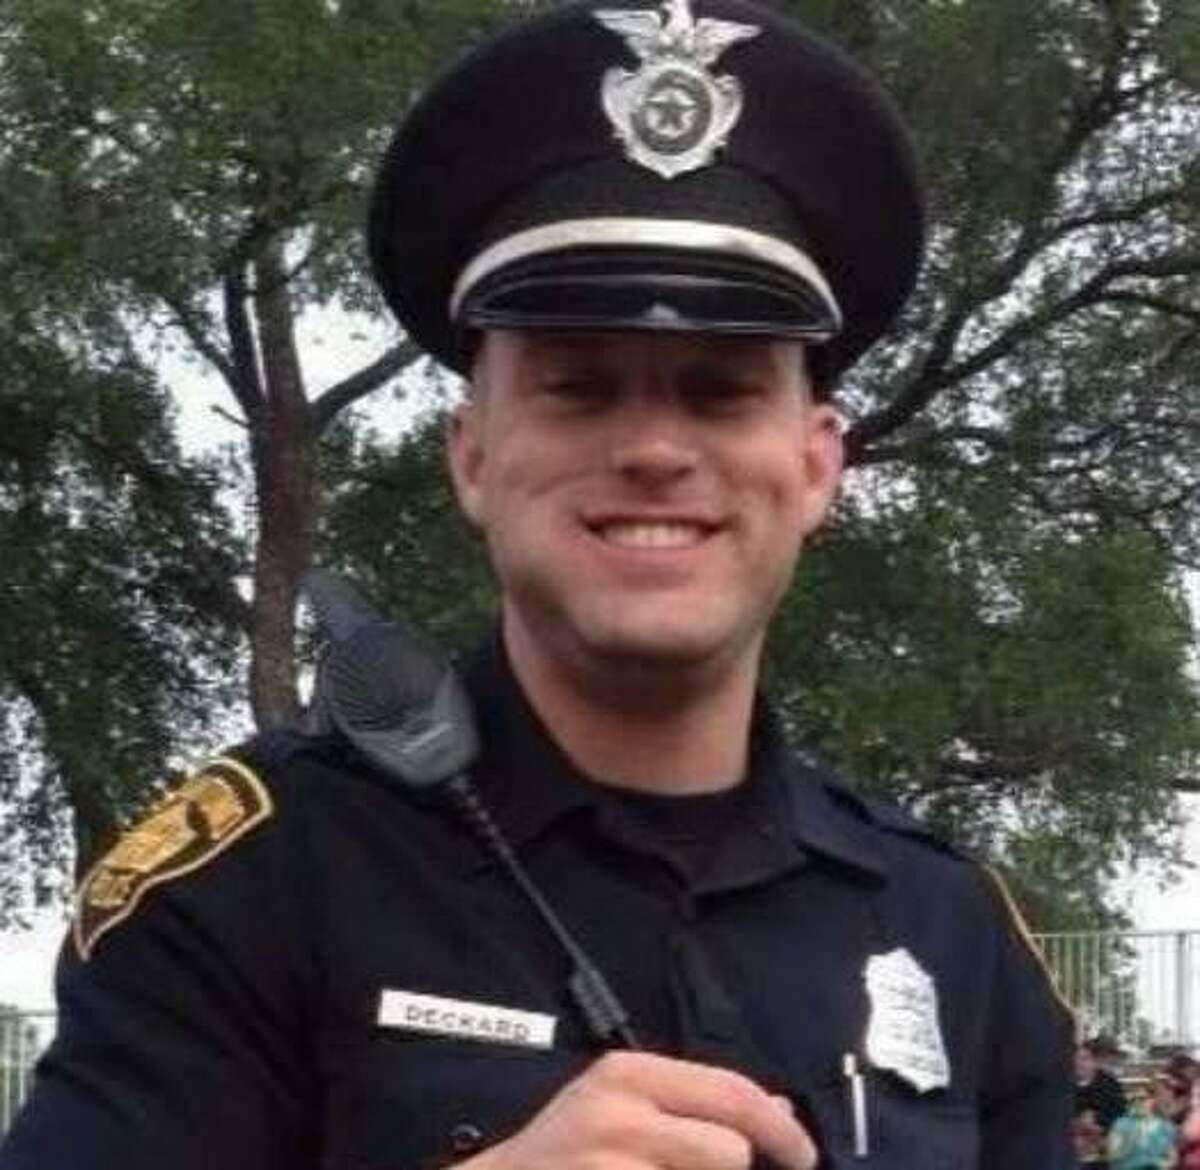 San Antonio police Officer Bobby Deckard died Dec. 20, 2013, about two weeks after he was shot.